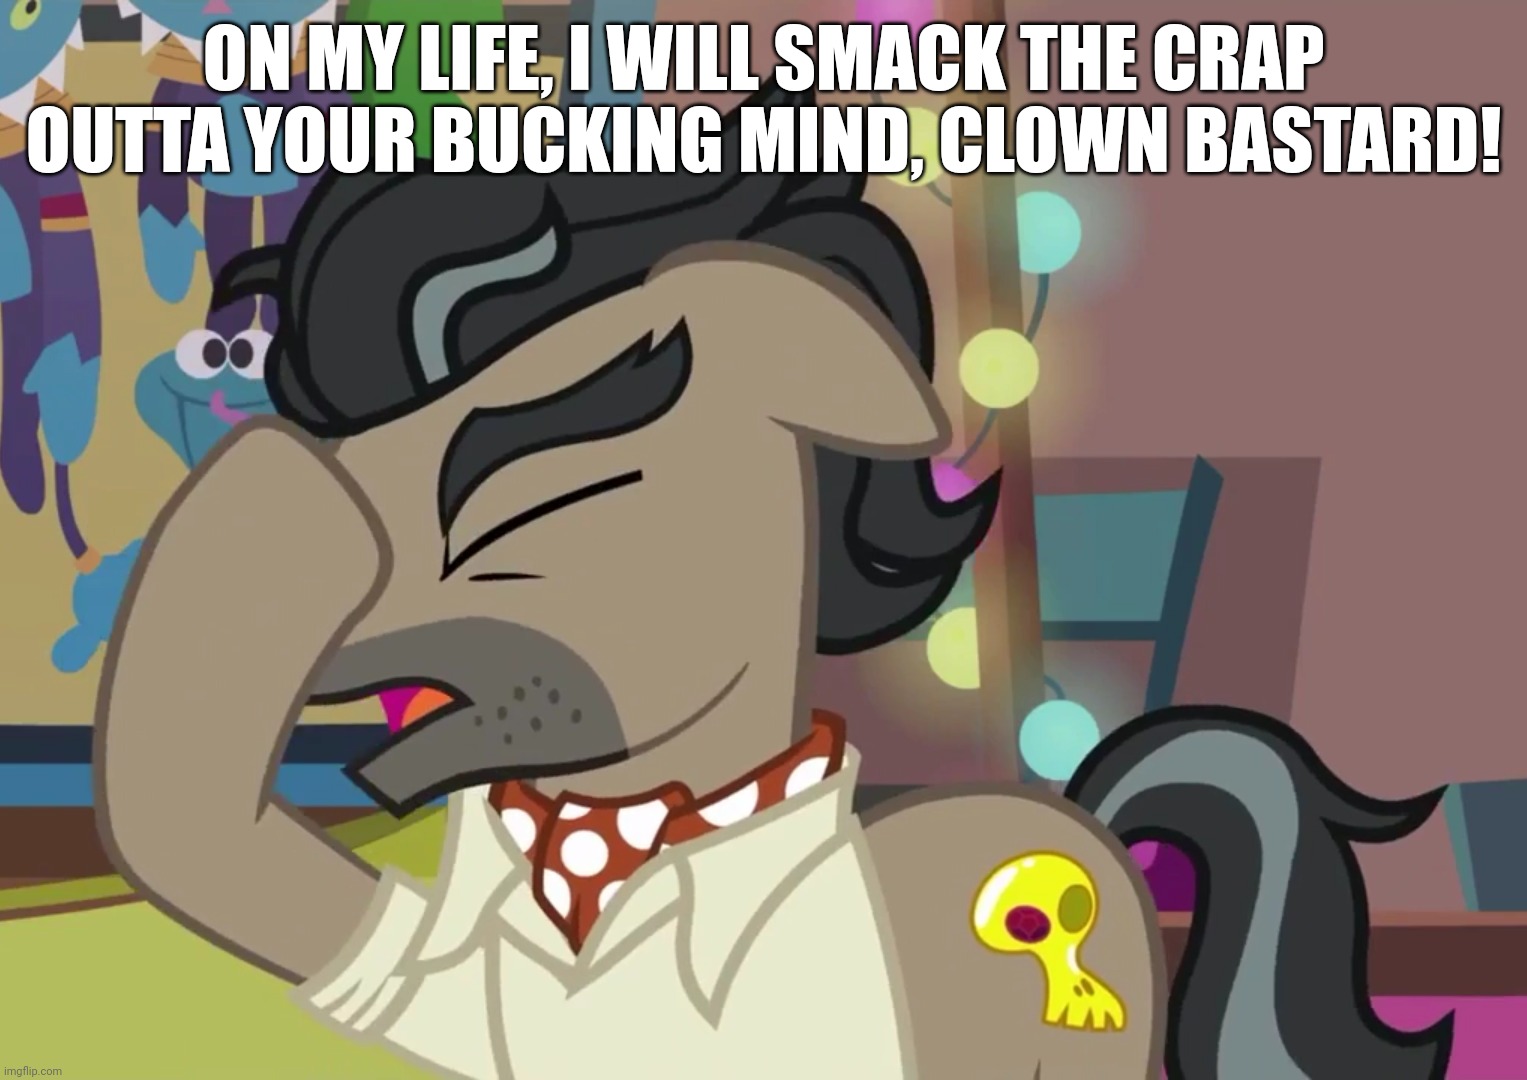 ON MY LIFE, I WILL SMACK THE CRAP OUTTA YOUR BUCKING MIND, CLOWN BASTARD! | made w/ Imgflip meme maker